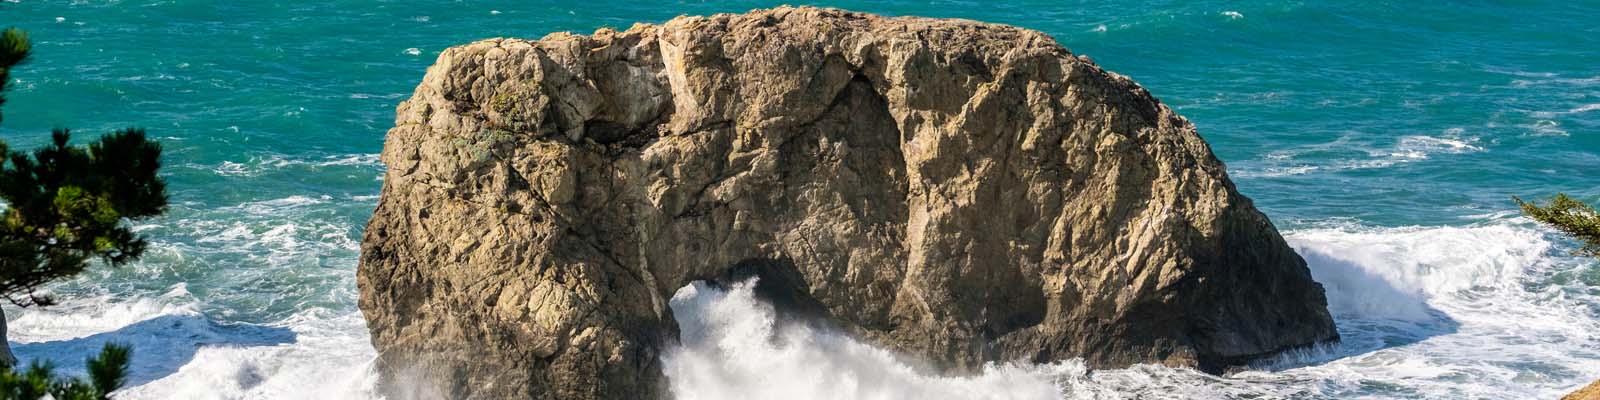 Pictured: Large rock in the sea with waves in Oregon.